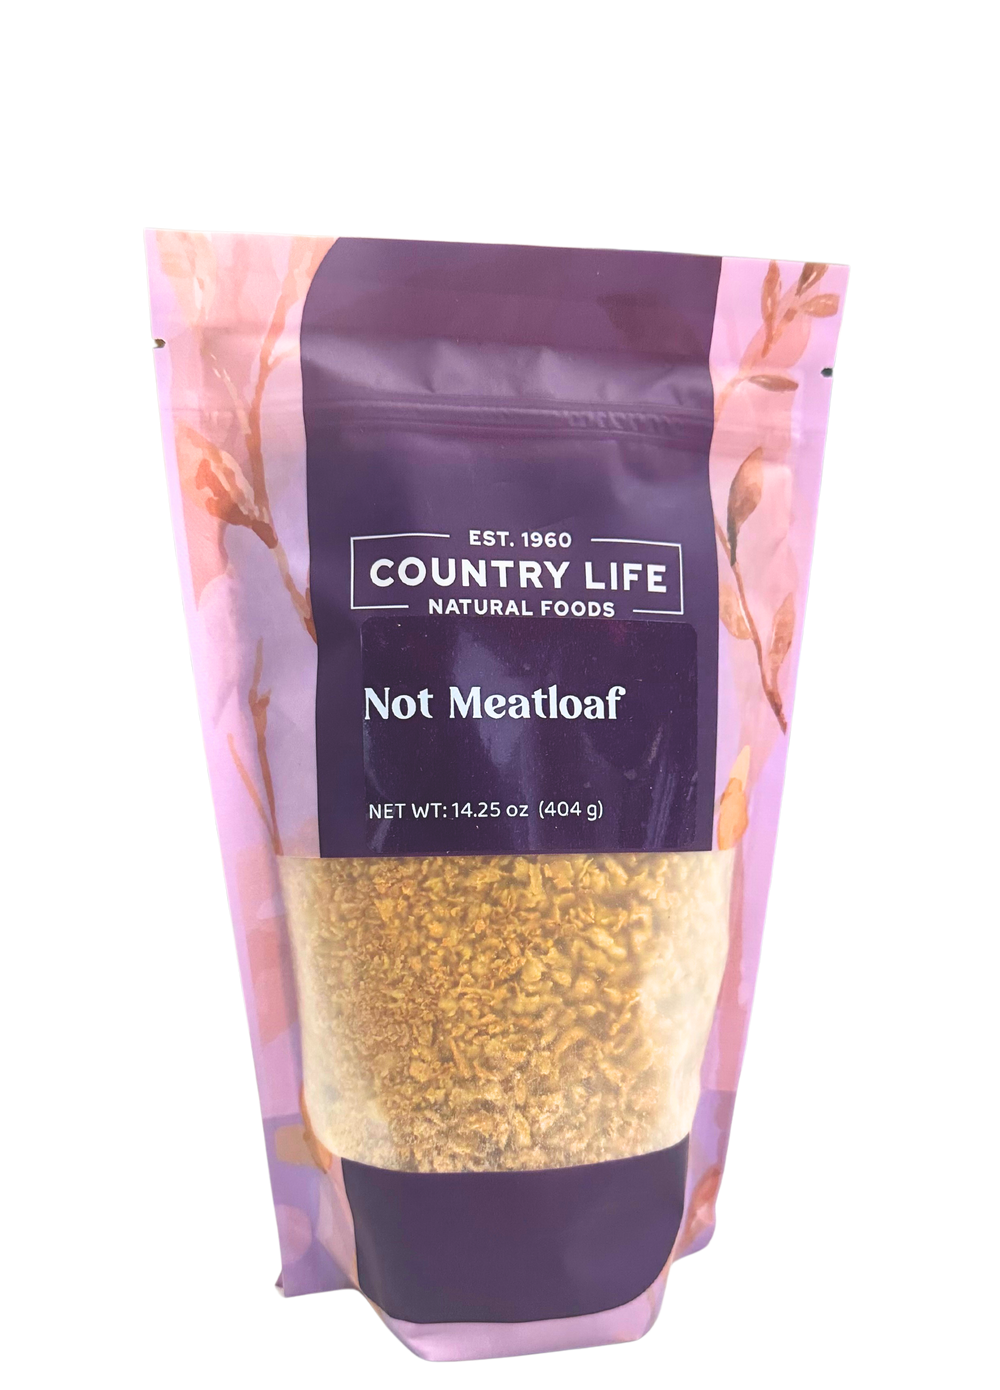 Not Meatloaf - Country Life Natural Foods